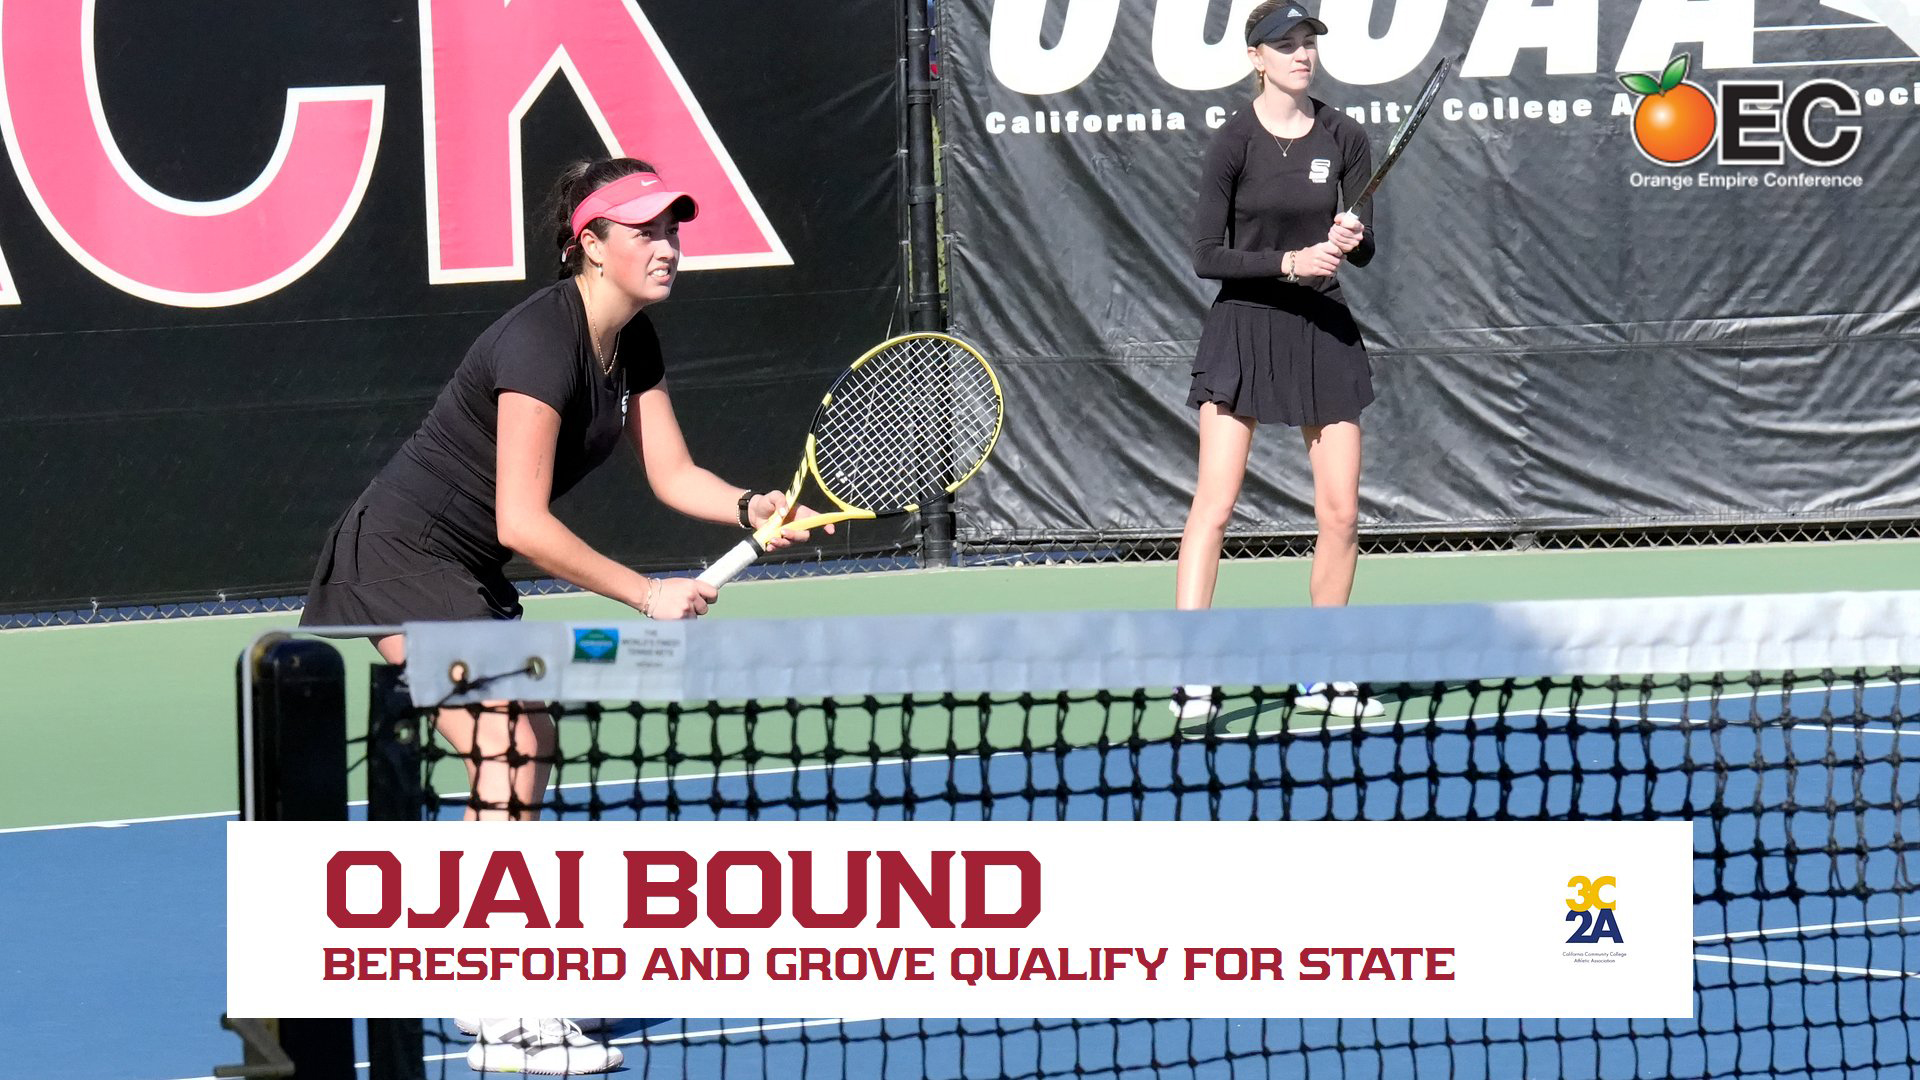 Two women’s doubles teams qualify for state